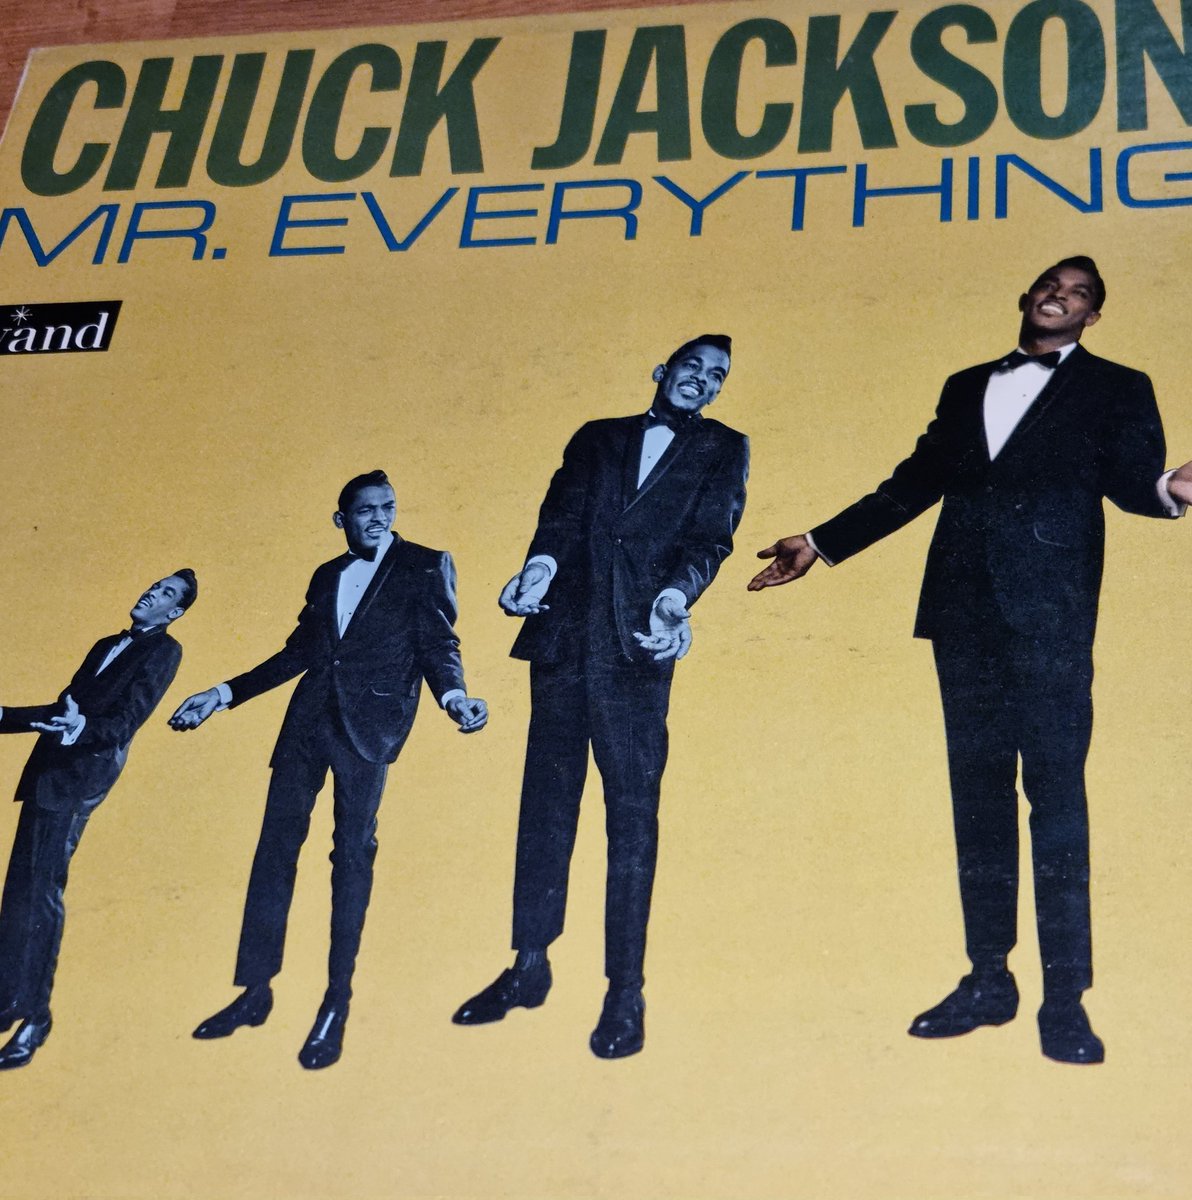 Extremely sad news that Chuck Jackson has died. One of #Soul music's greatest singers & entertainers. Championed way back by Randy & the 100 Club @6TsSoul folk & @AceRecordsLtd Gonna give him some hammer down #TheStaff on Saturday ❤️‍🩹 #RIPMrEverything youtu.be/nKnCOEDgBb8